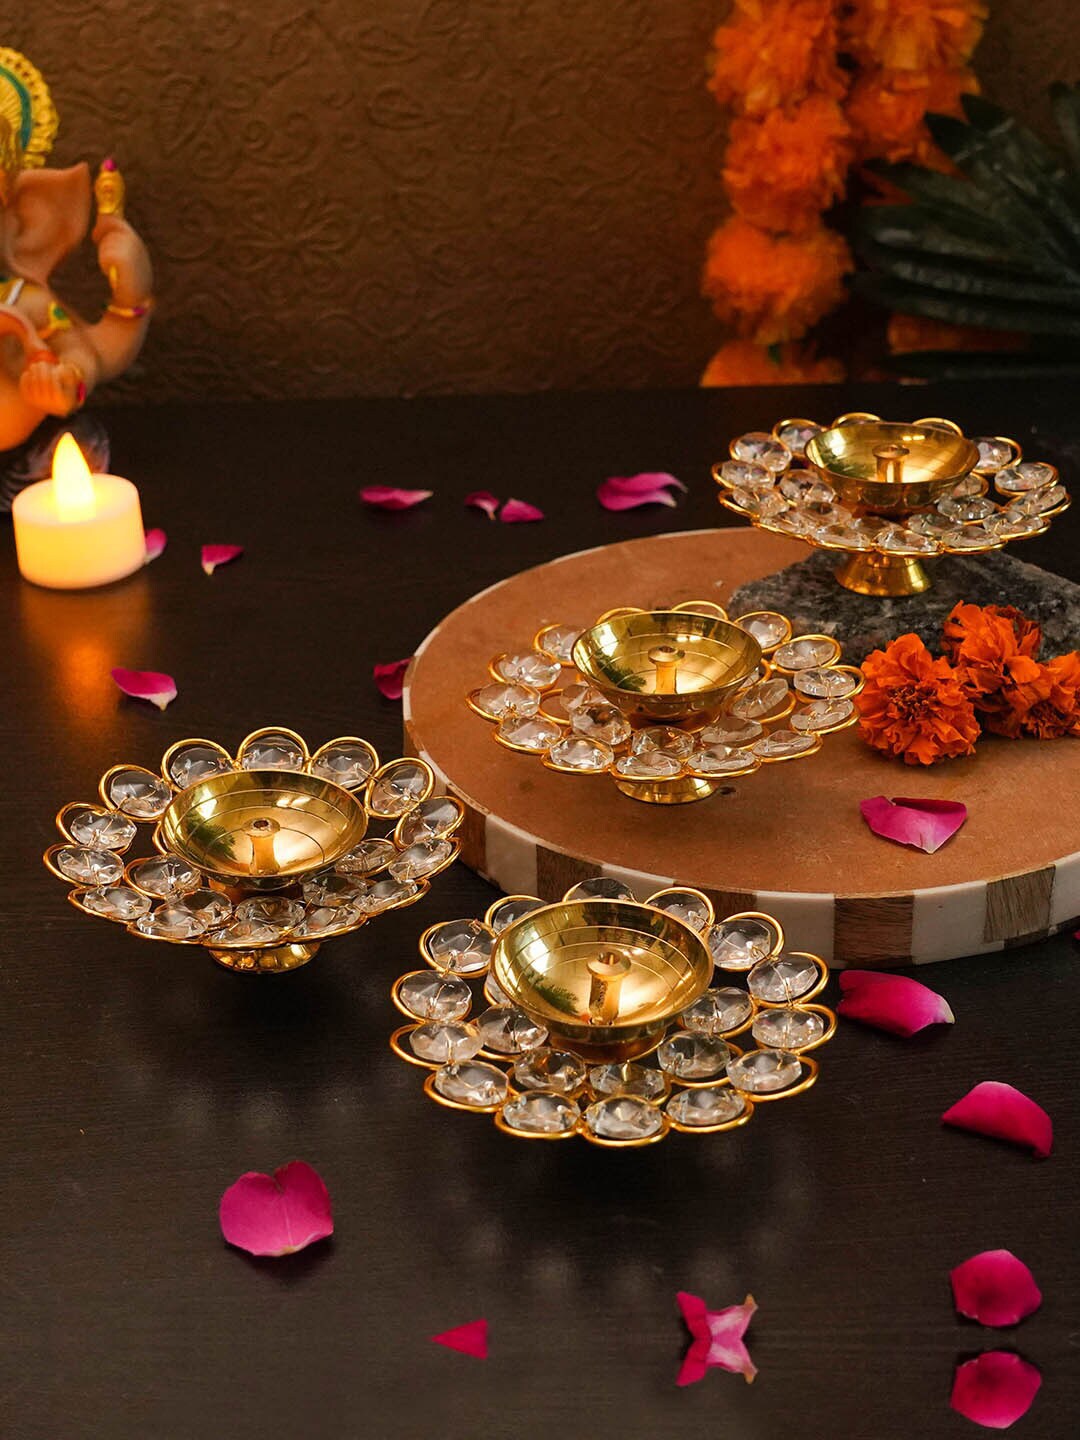 TIED RIBBONS Set of 4 Gold-Toned Decorative Crystal Diyas Price in India